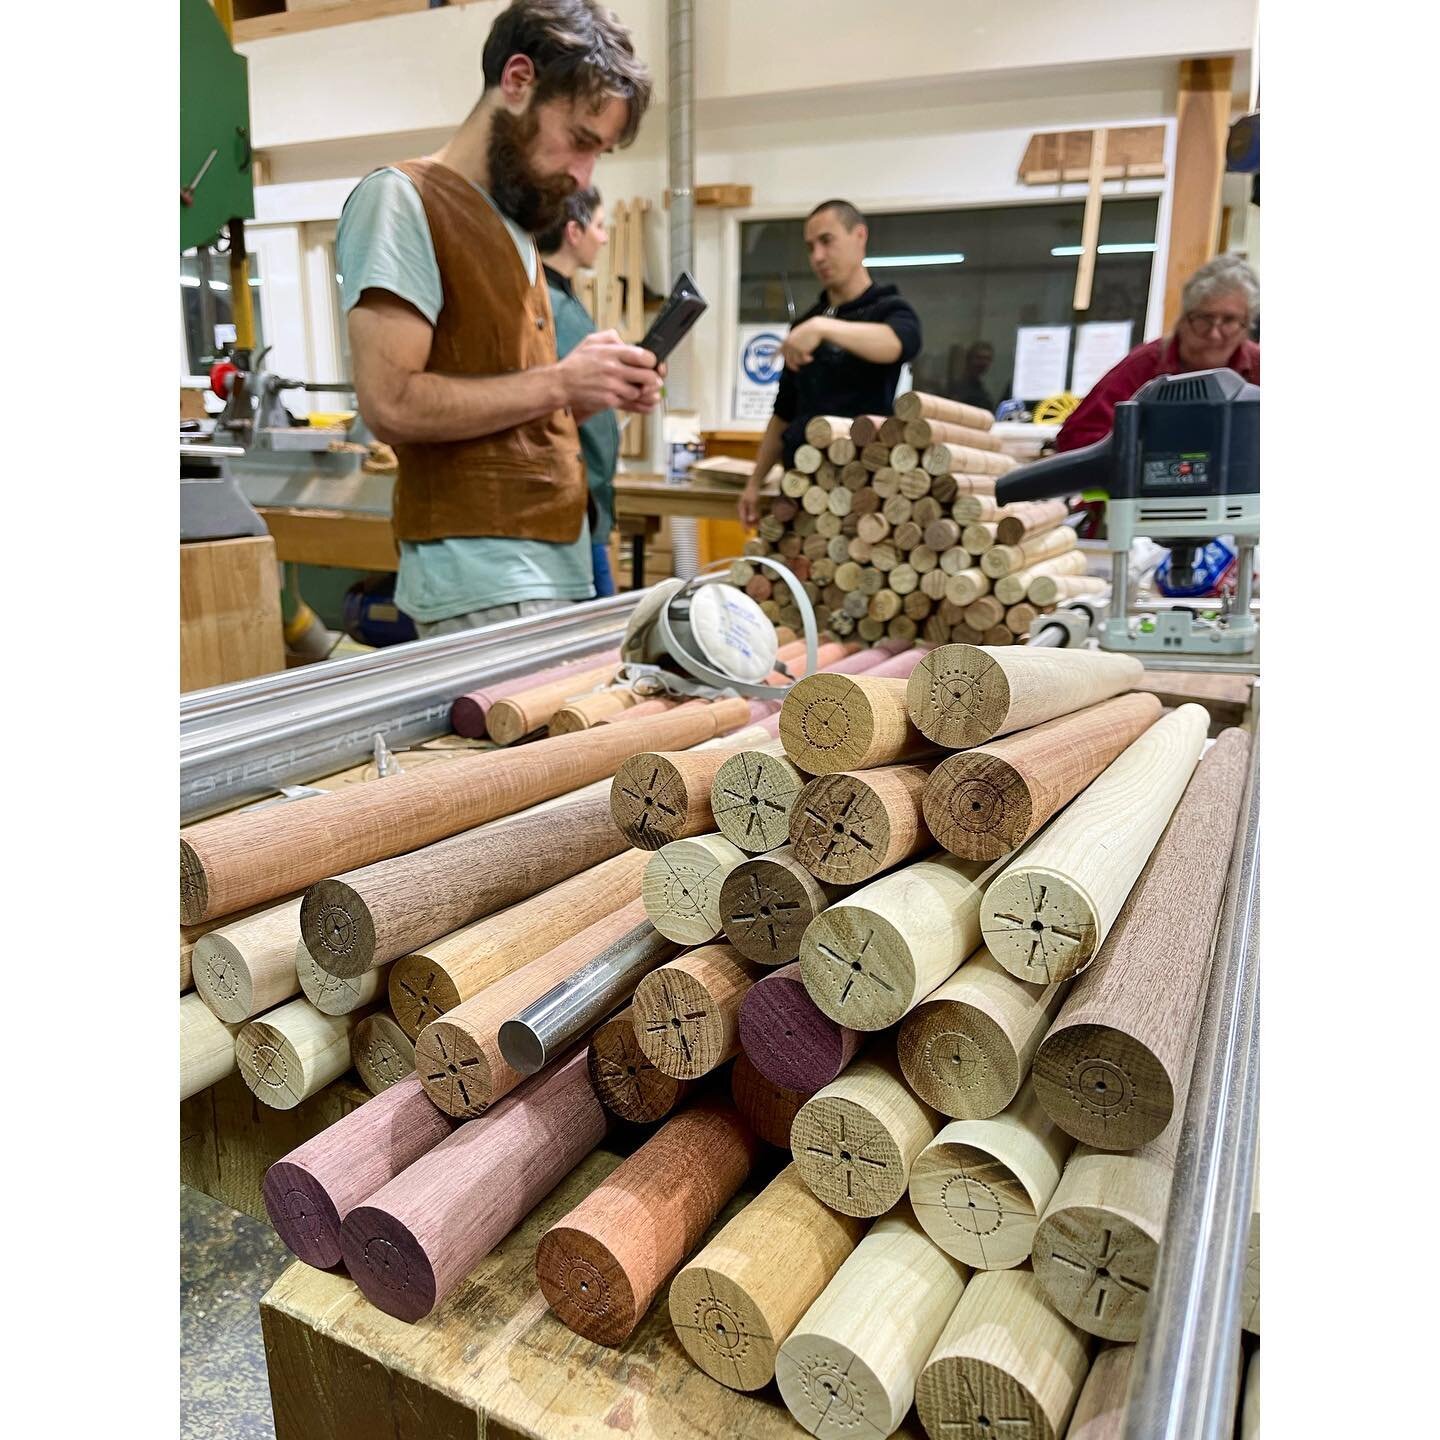 We had a Working Bee on Sunday with a high ambition to make 30 stools for the Guild from timber that was lying around the school. 11 wonderful volunteers turned up for a day of making, talking and eating. We didn&rsquo;t reach our lofty goal but had 